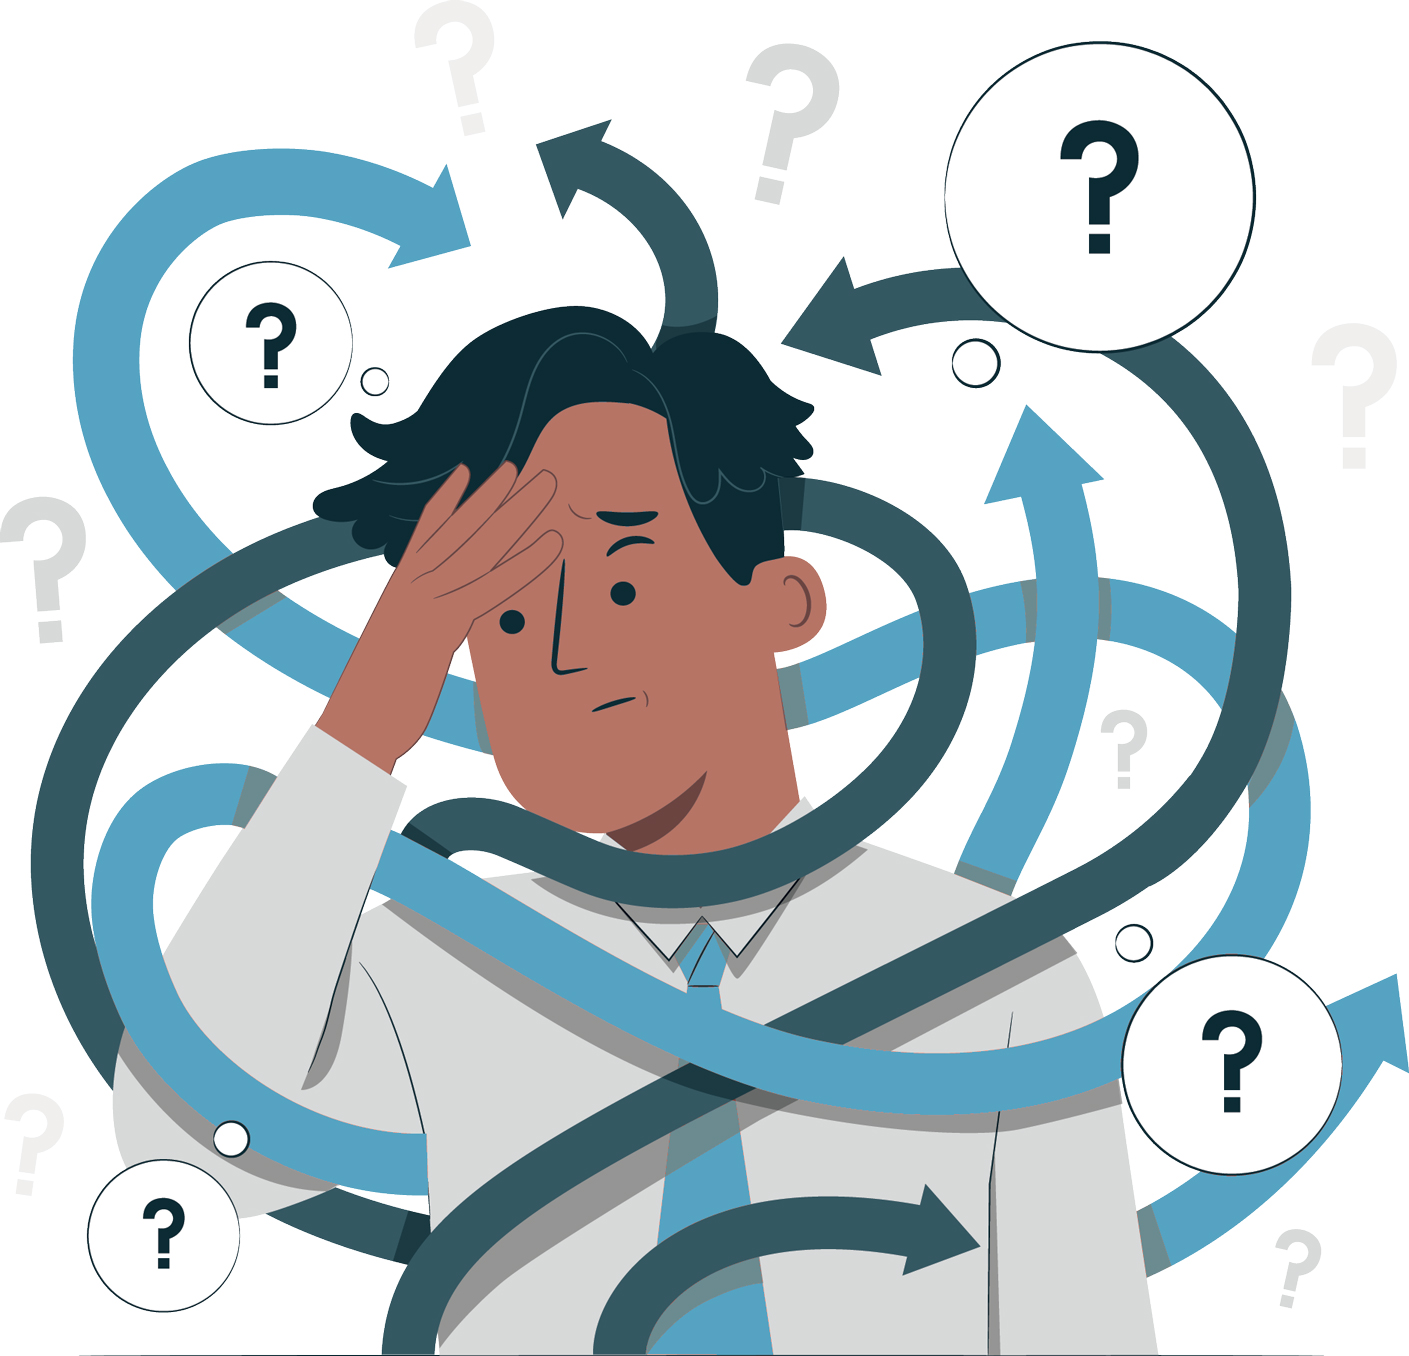 An illustration on a Miami-based online ADHD counseling service website showing a puzzled man with swirling arrows and question marks around his head, symbolizing confusion and the challenges of ADHD, with a call-to-action for a free self-assessment.